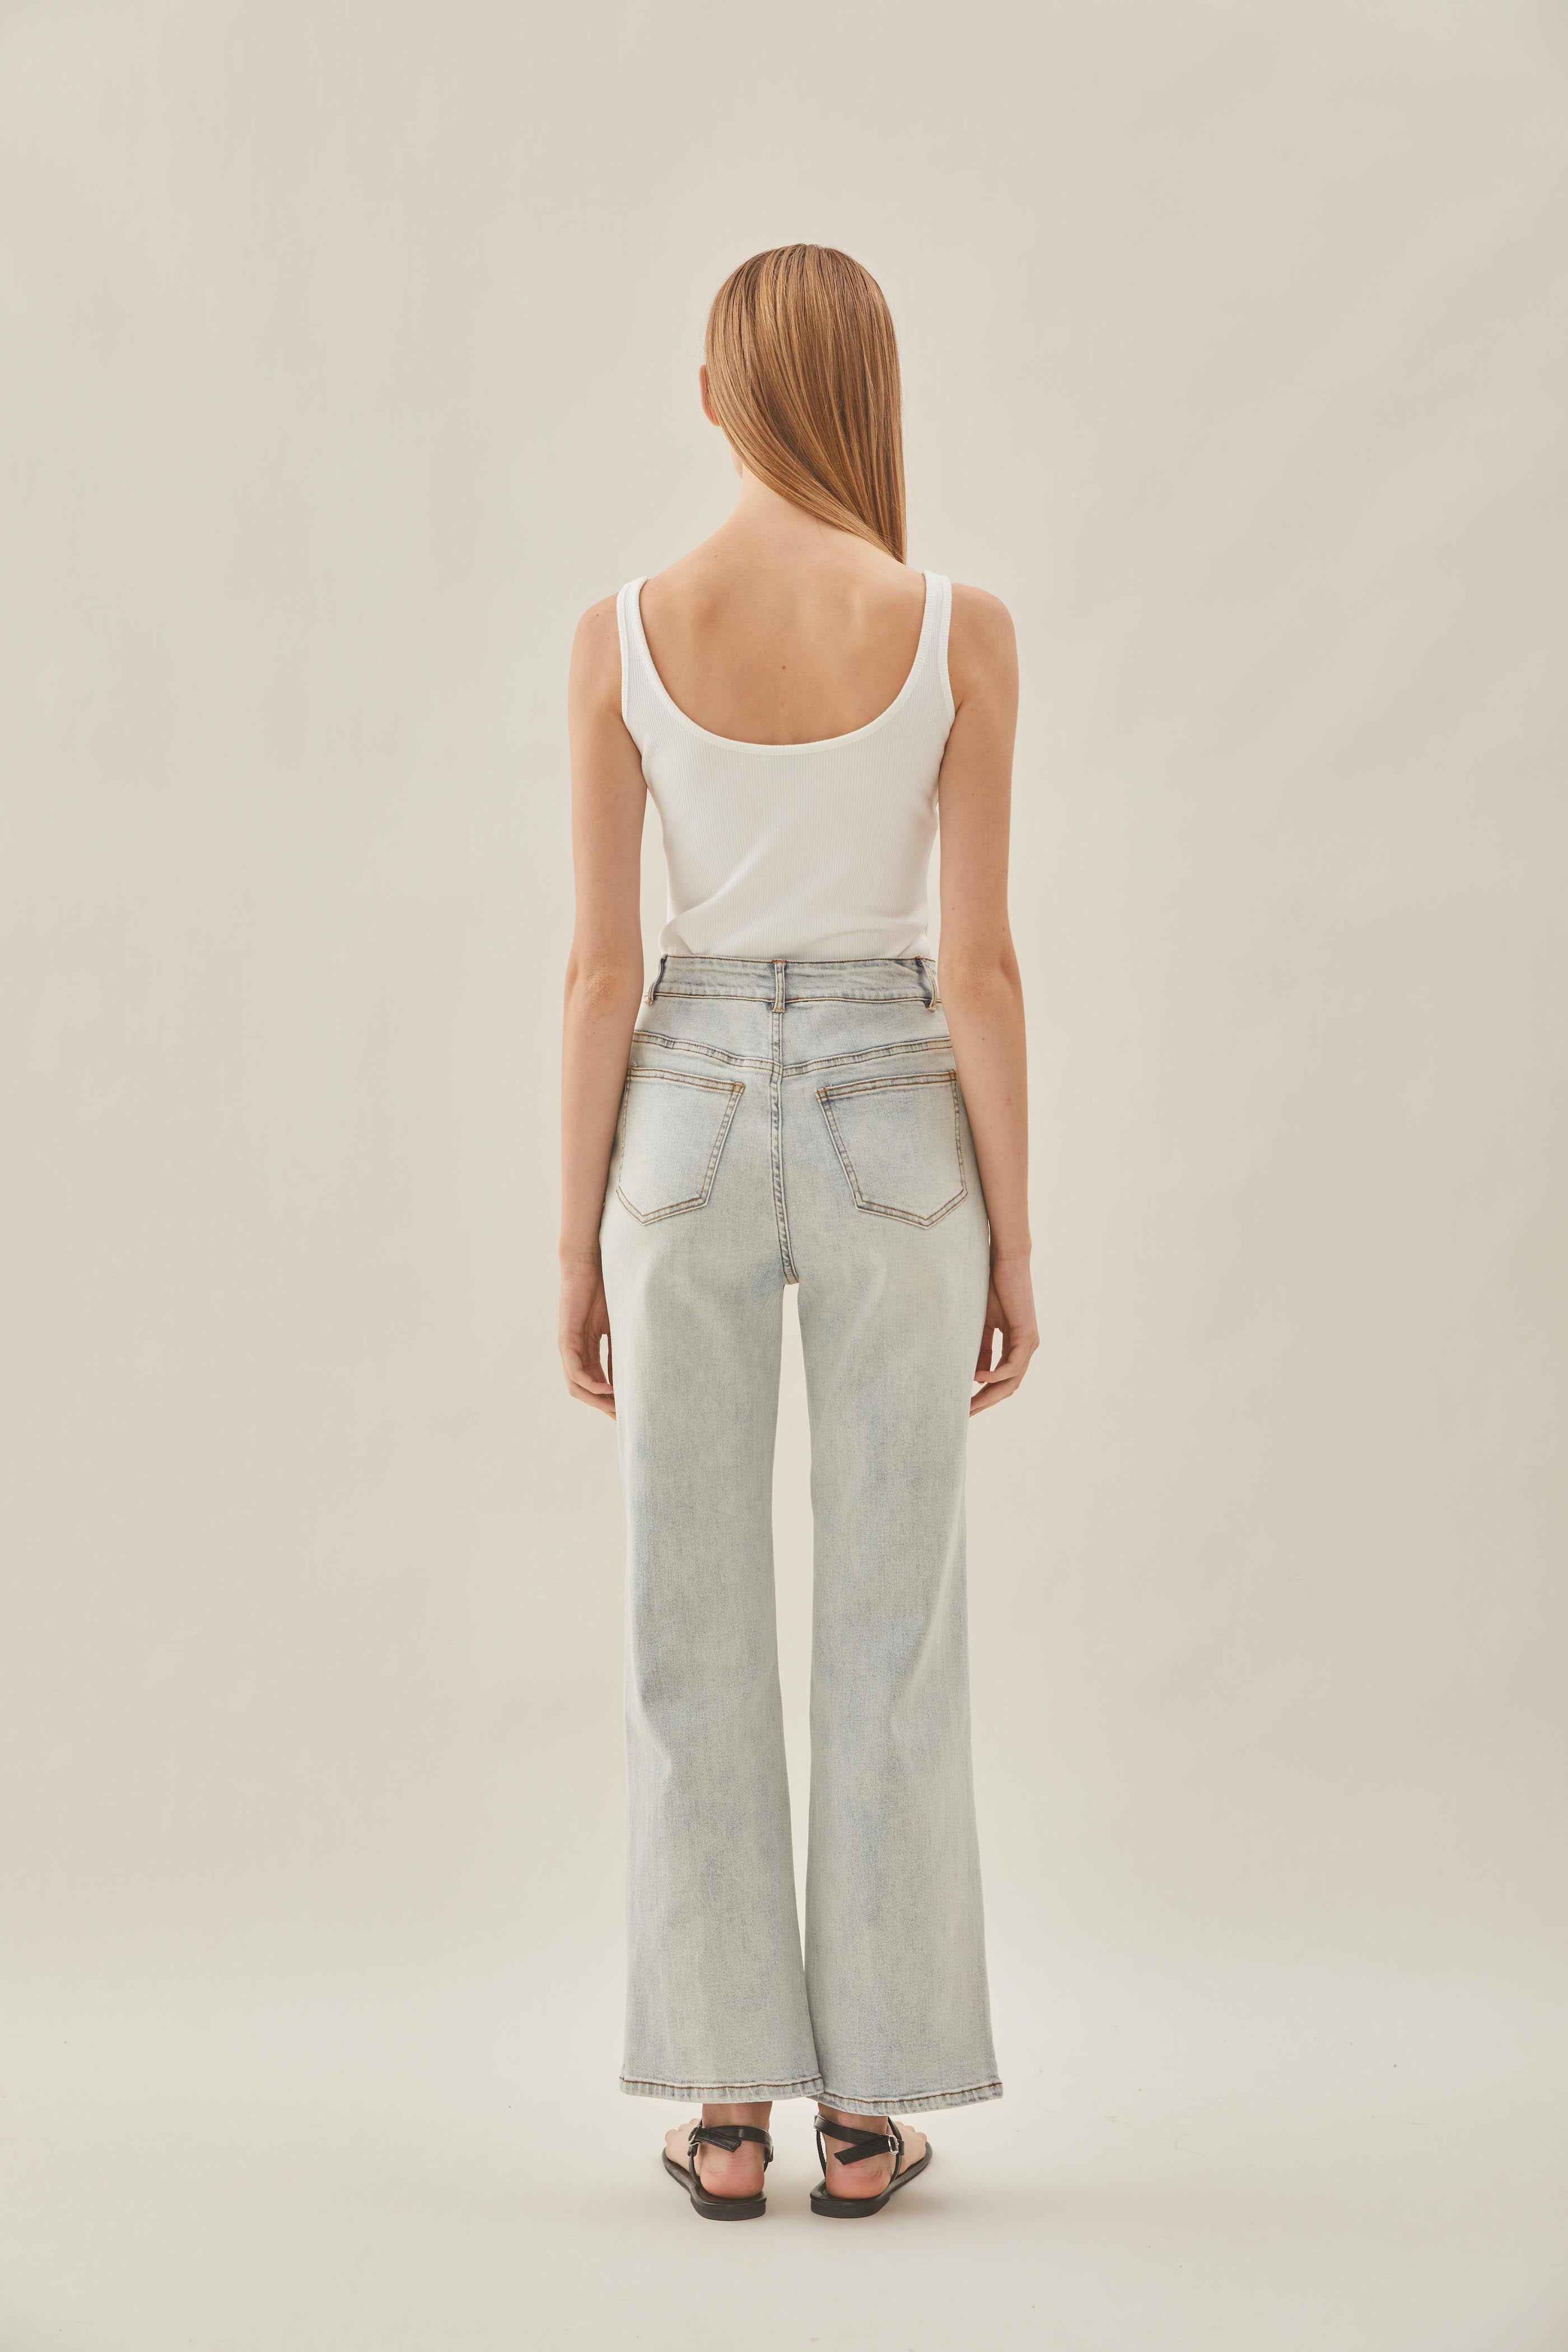 STUDIOS High Rise Straight Cut Stretch Jeans in Light Wash